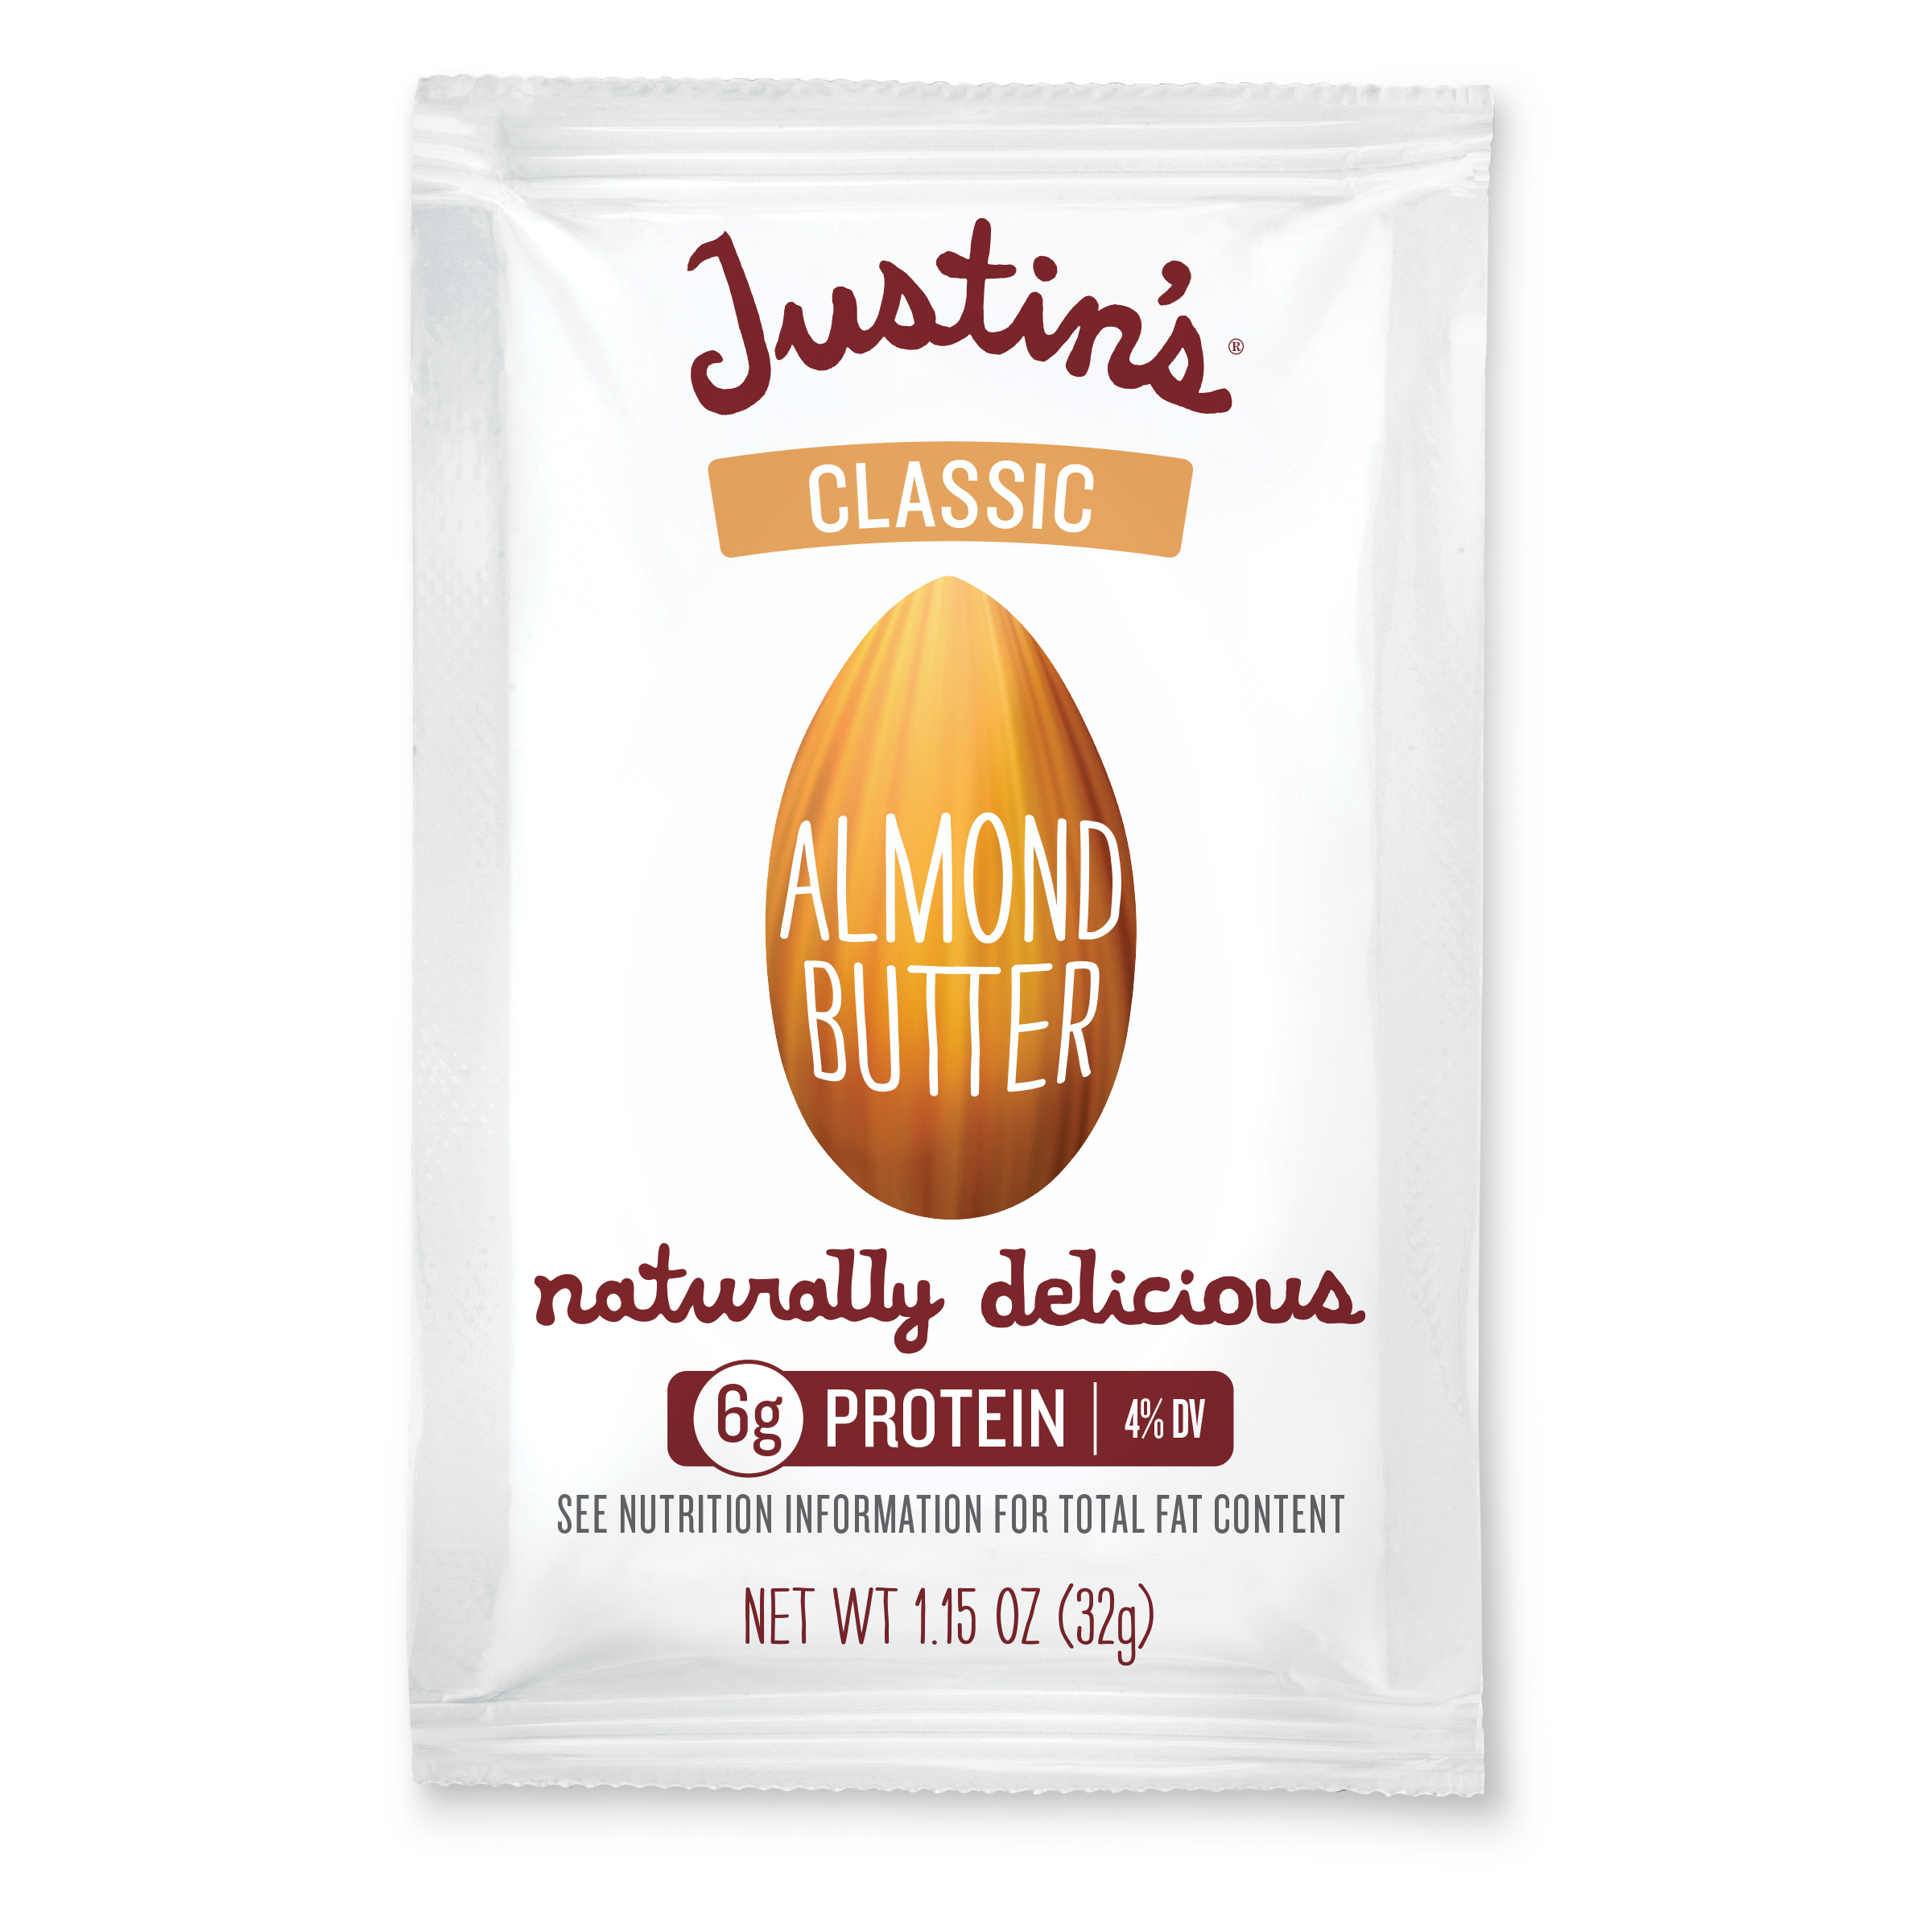 Justins-SqueezePack-ClassicAB-Front